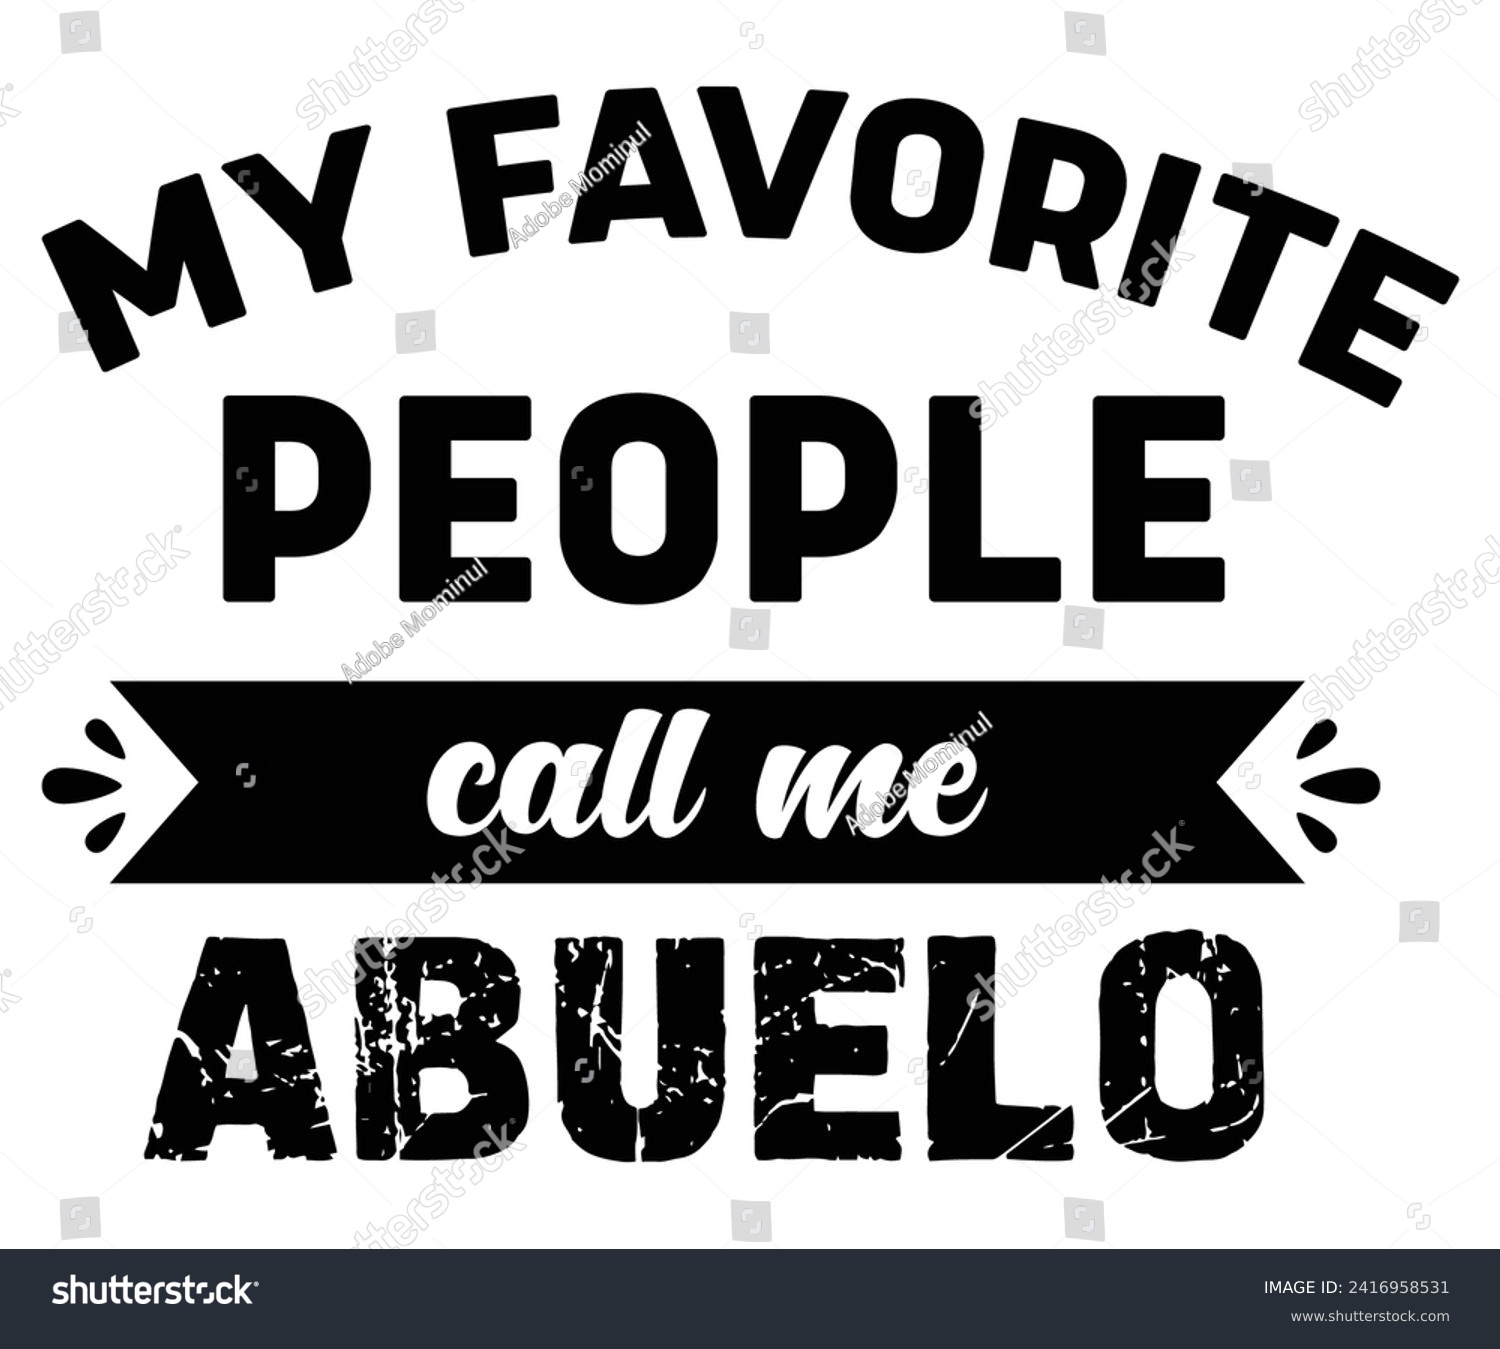 SVG of My Favorite People Call Me Abuelo Svg,Father's Day Svg,Papa svg,Grandpa Svg,Father's Day Saying Qoutes,Dad Svg,Funny Father, Gift For Dad Svg,Daddy Svg,Family Svg,T shirt Design,Cut File, 
 svg